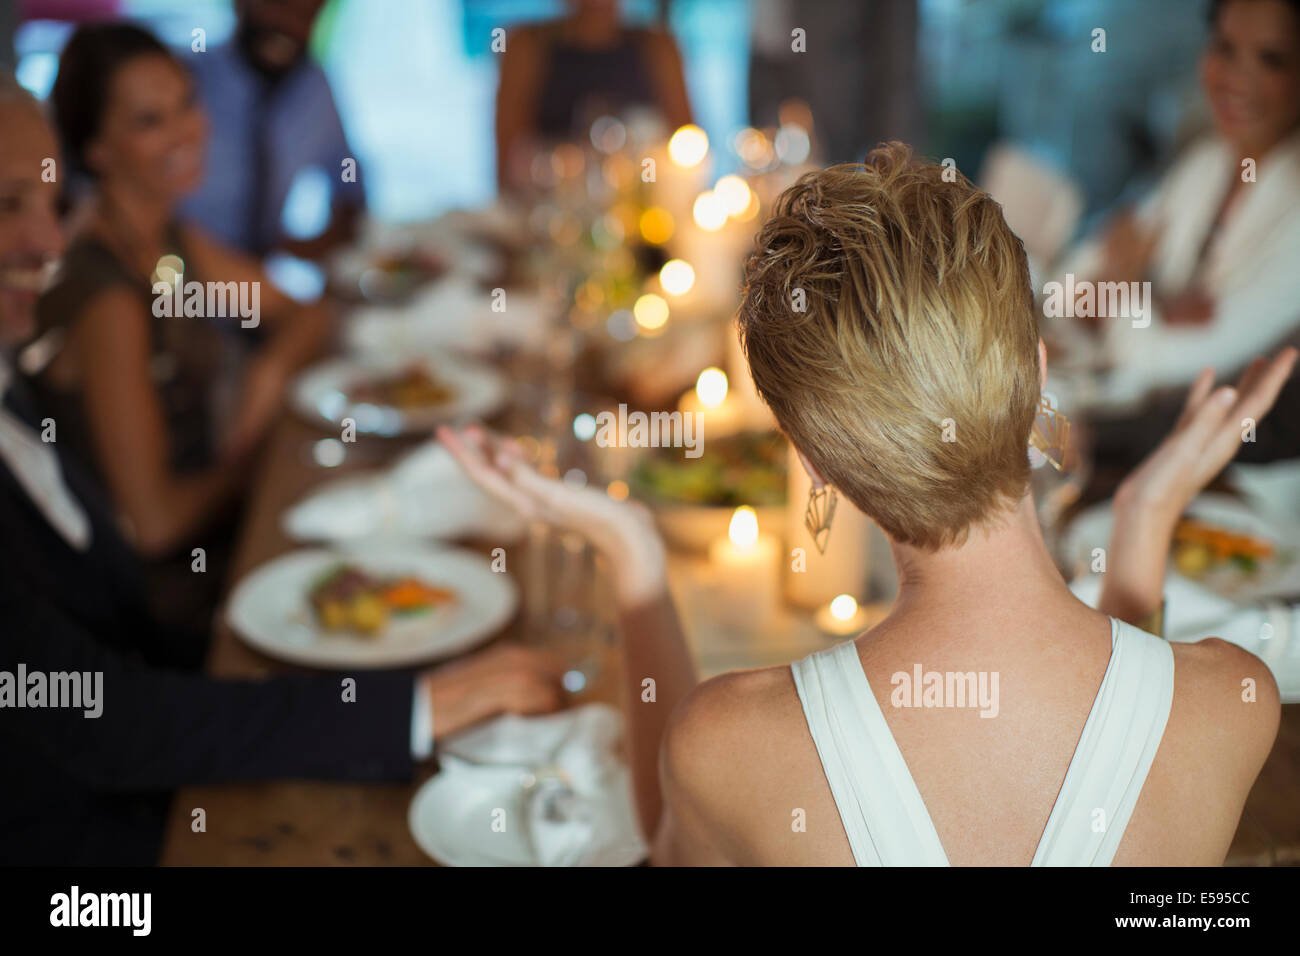 Woman clapping at dinner party Stock Photo